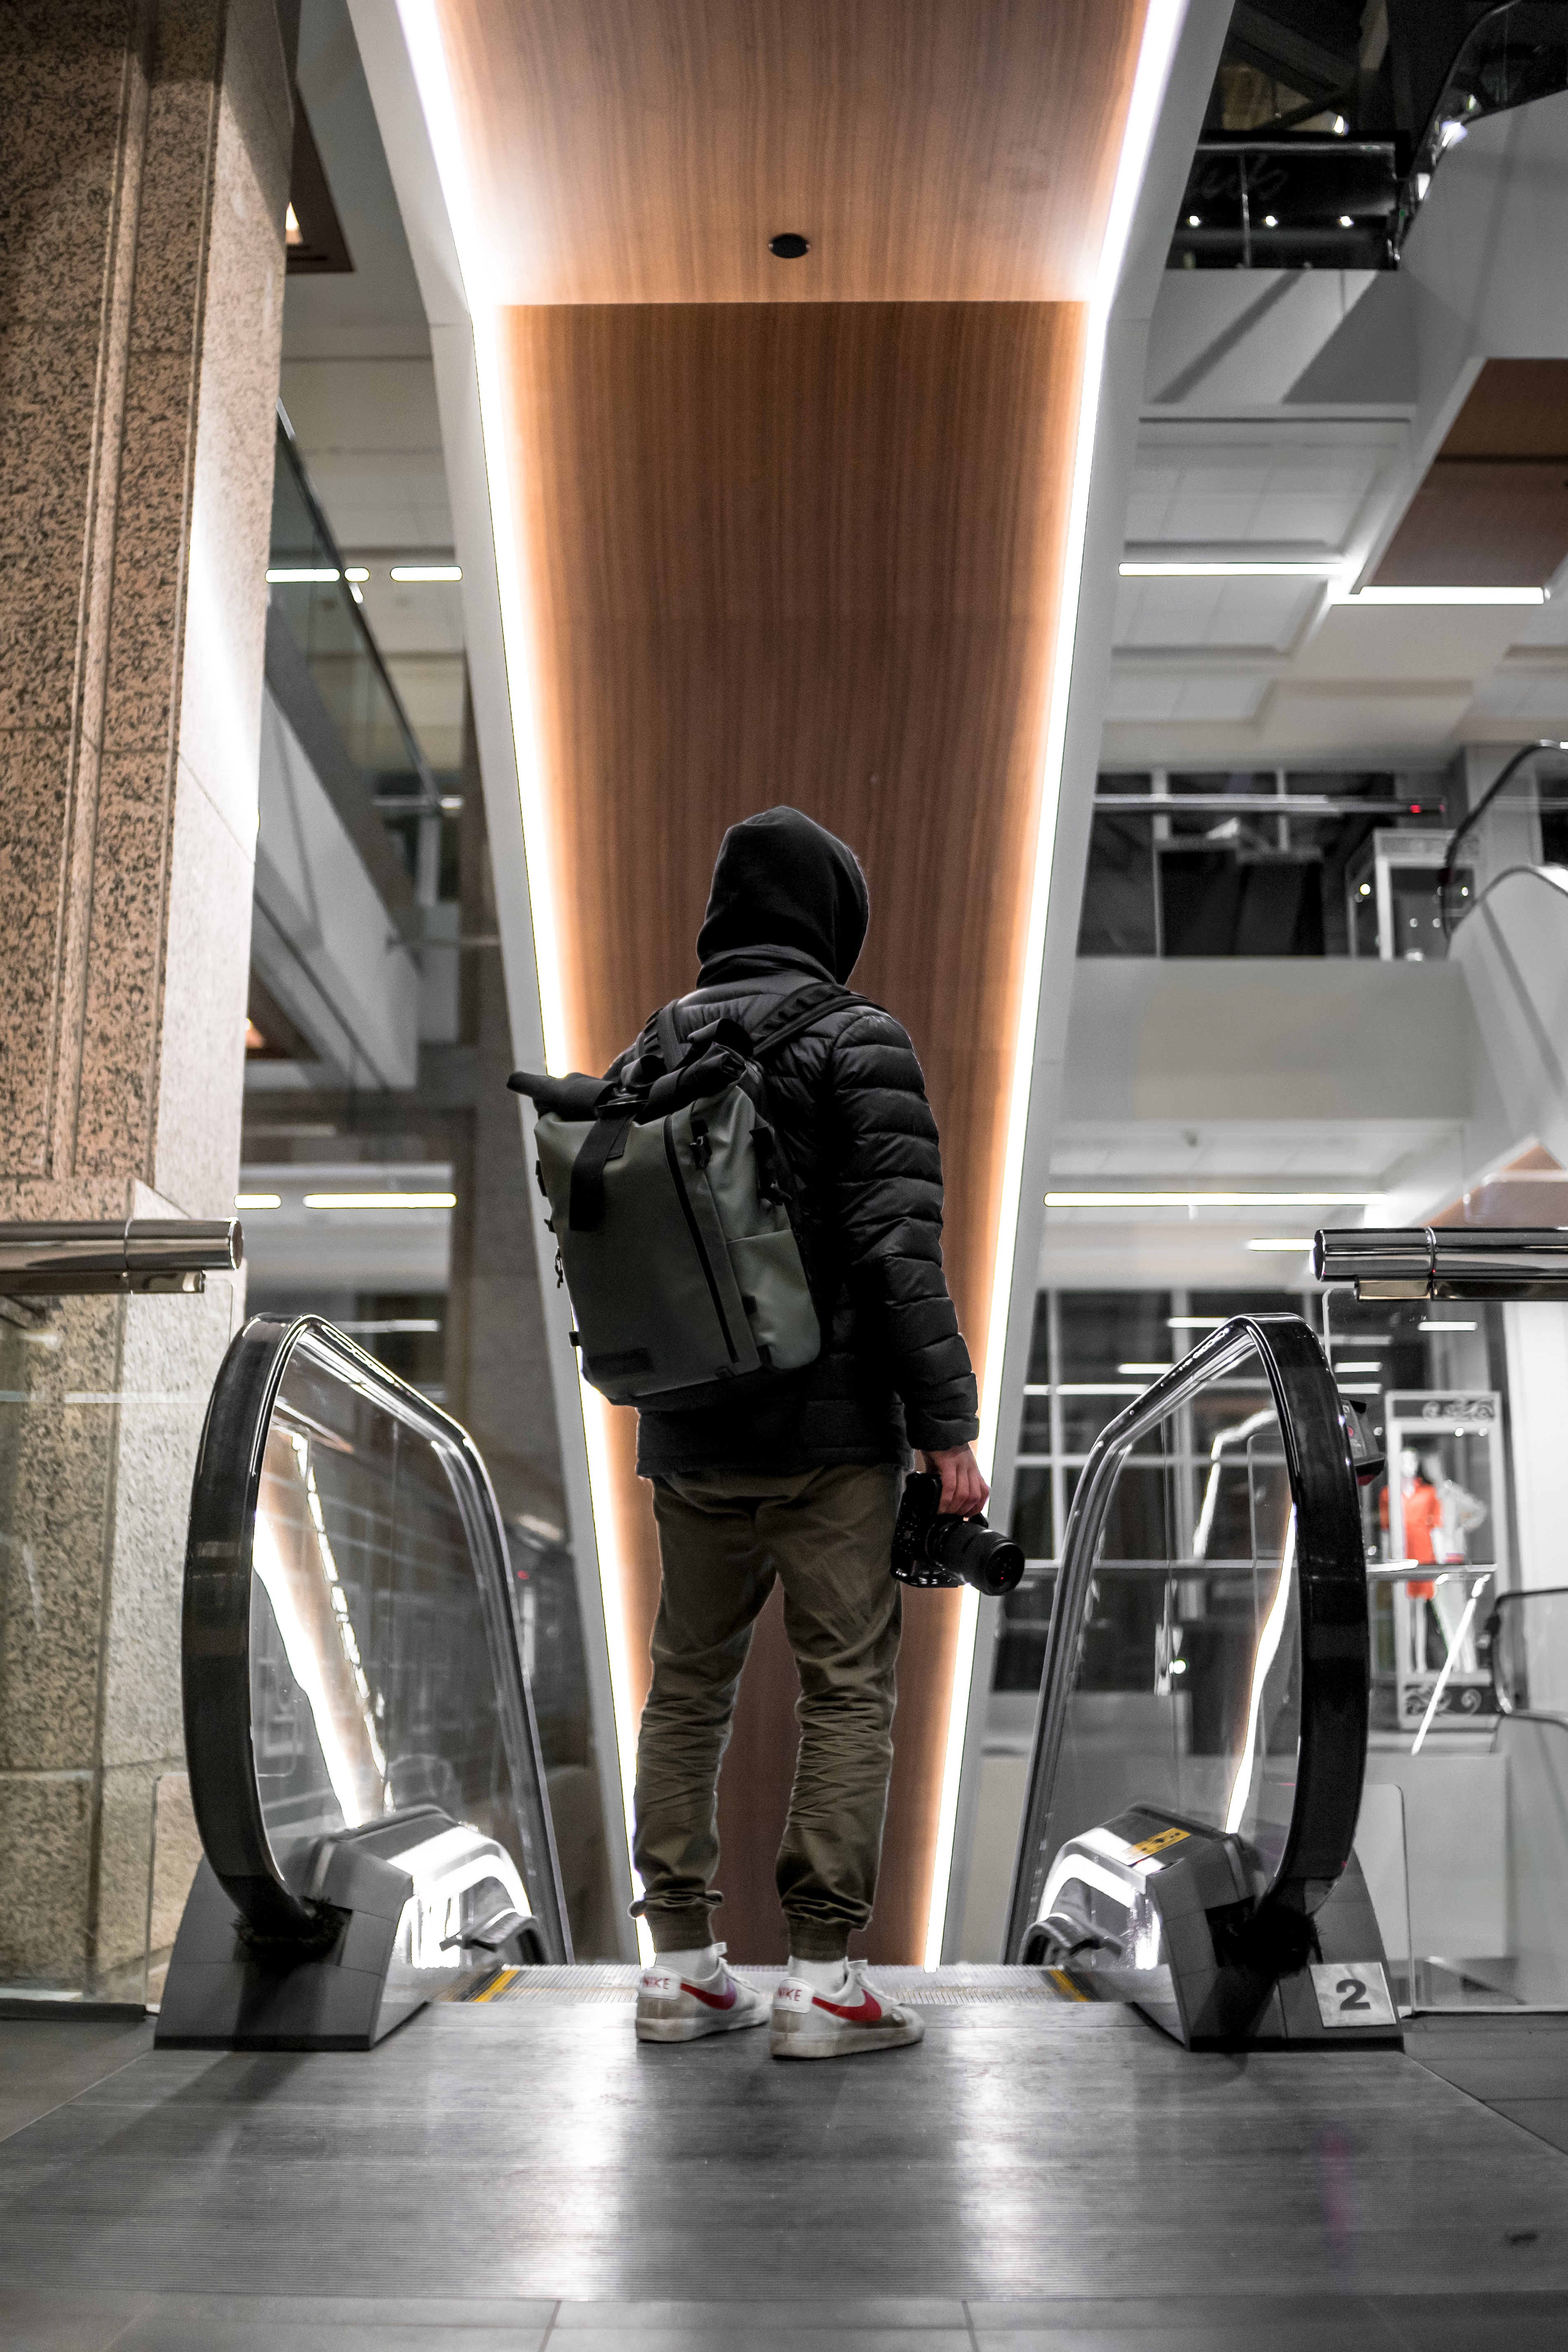 124623 Screensavers and Wallpapers Hood for phone. Download miscellanea, miscellaneous, photographer, hood, escalator pictures for free